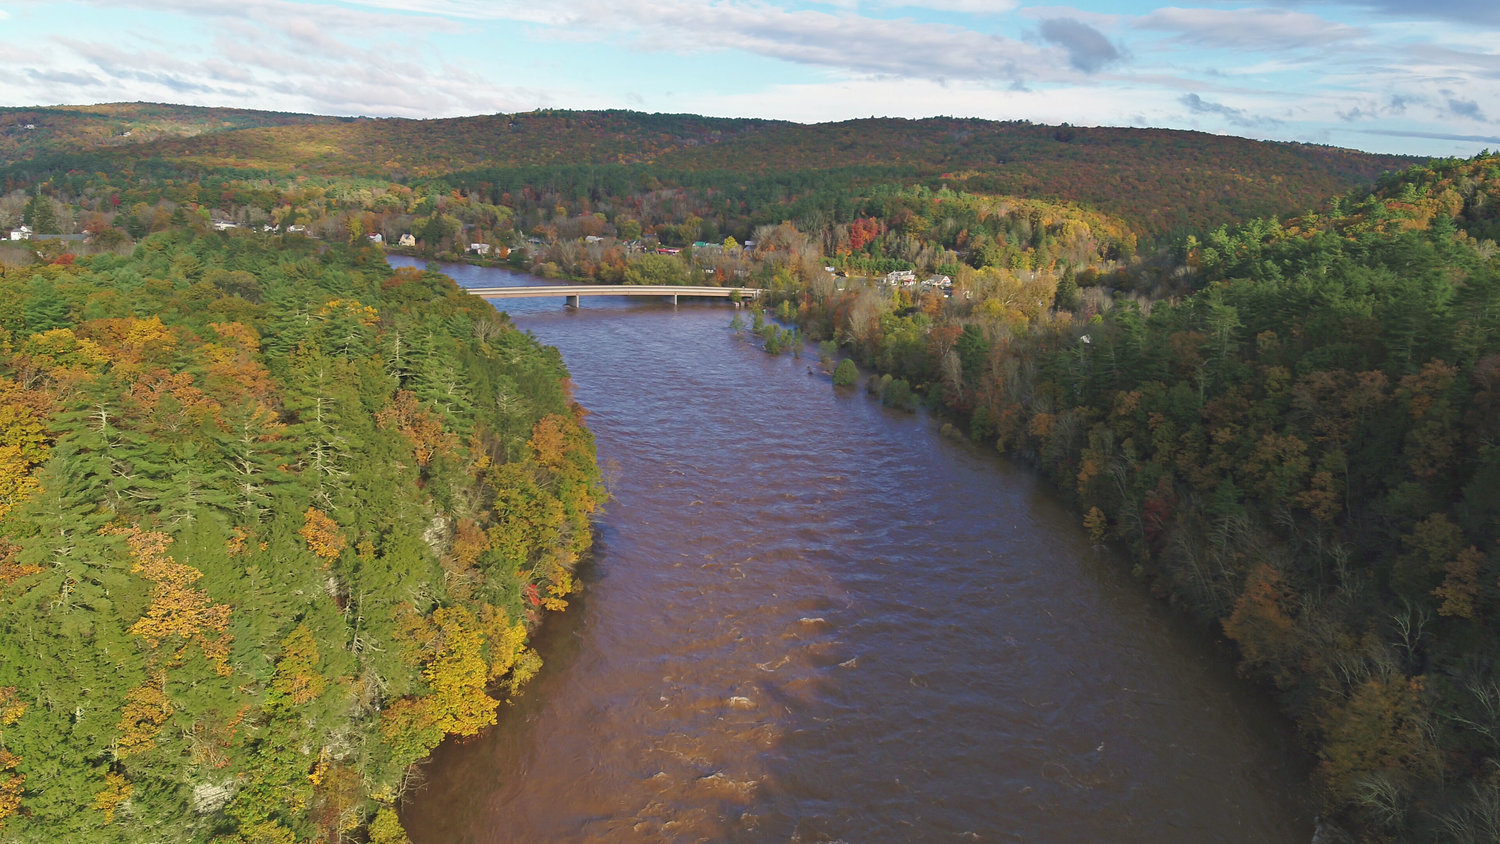 This is the Delaware River at Shohola Rapids; we’re looking upstream towards Barryville on the morning of October 27. The rocks are usually visible at Shohola Rapids, but they were covered by 17 feet of water when this photograph was taken. The gage upstream of here at Callicoon crested in the “moderate flood stage” (13.68 feet) and low-lying roads in that area were likely affected.